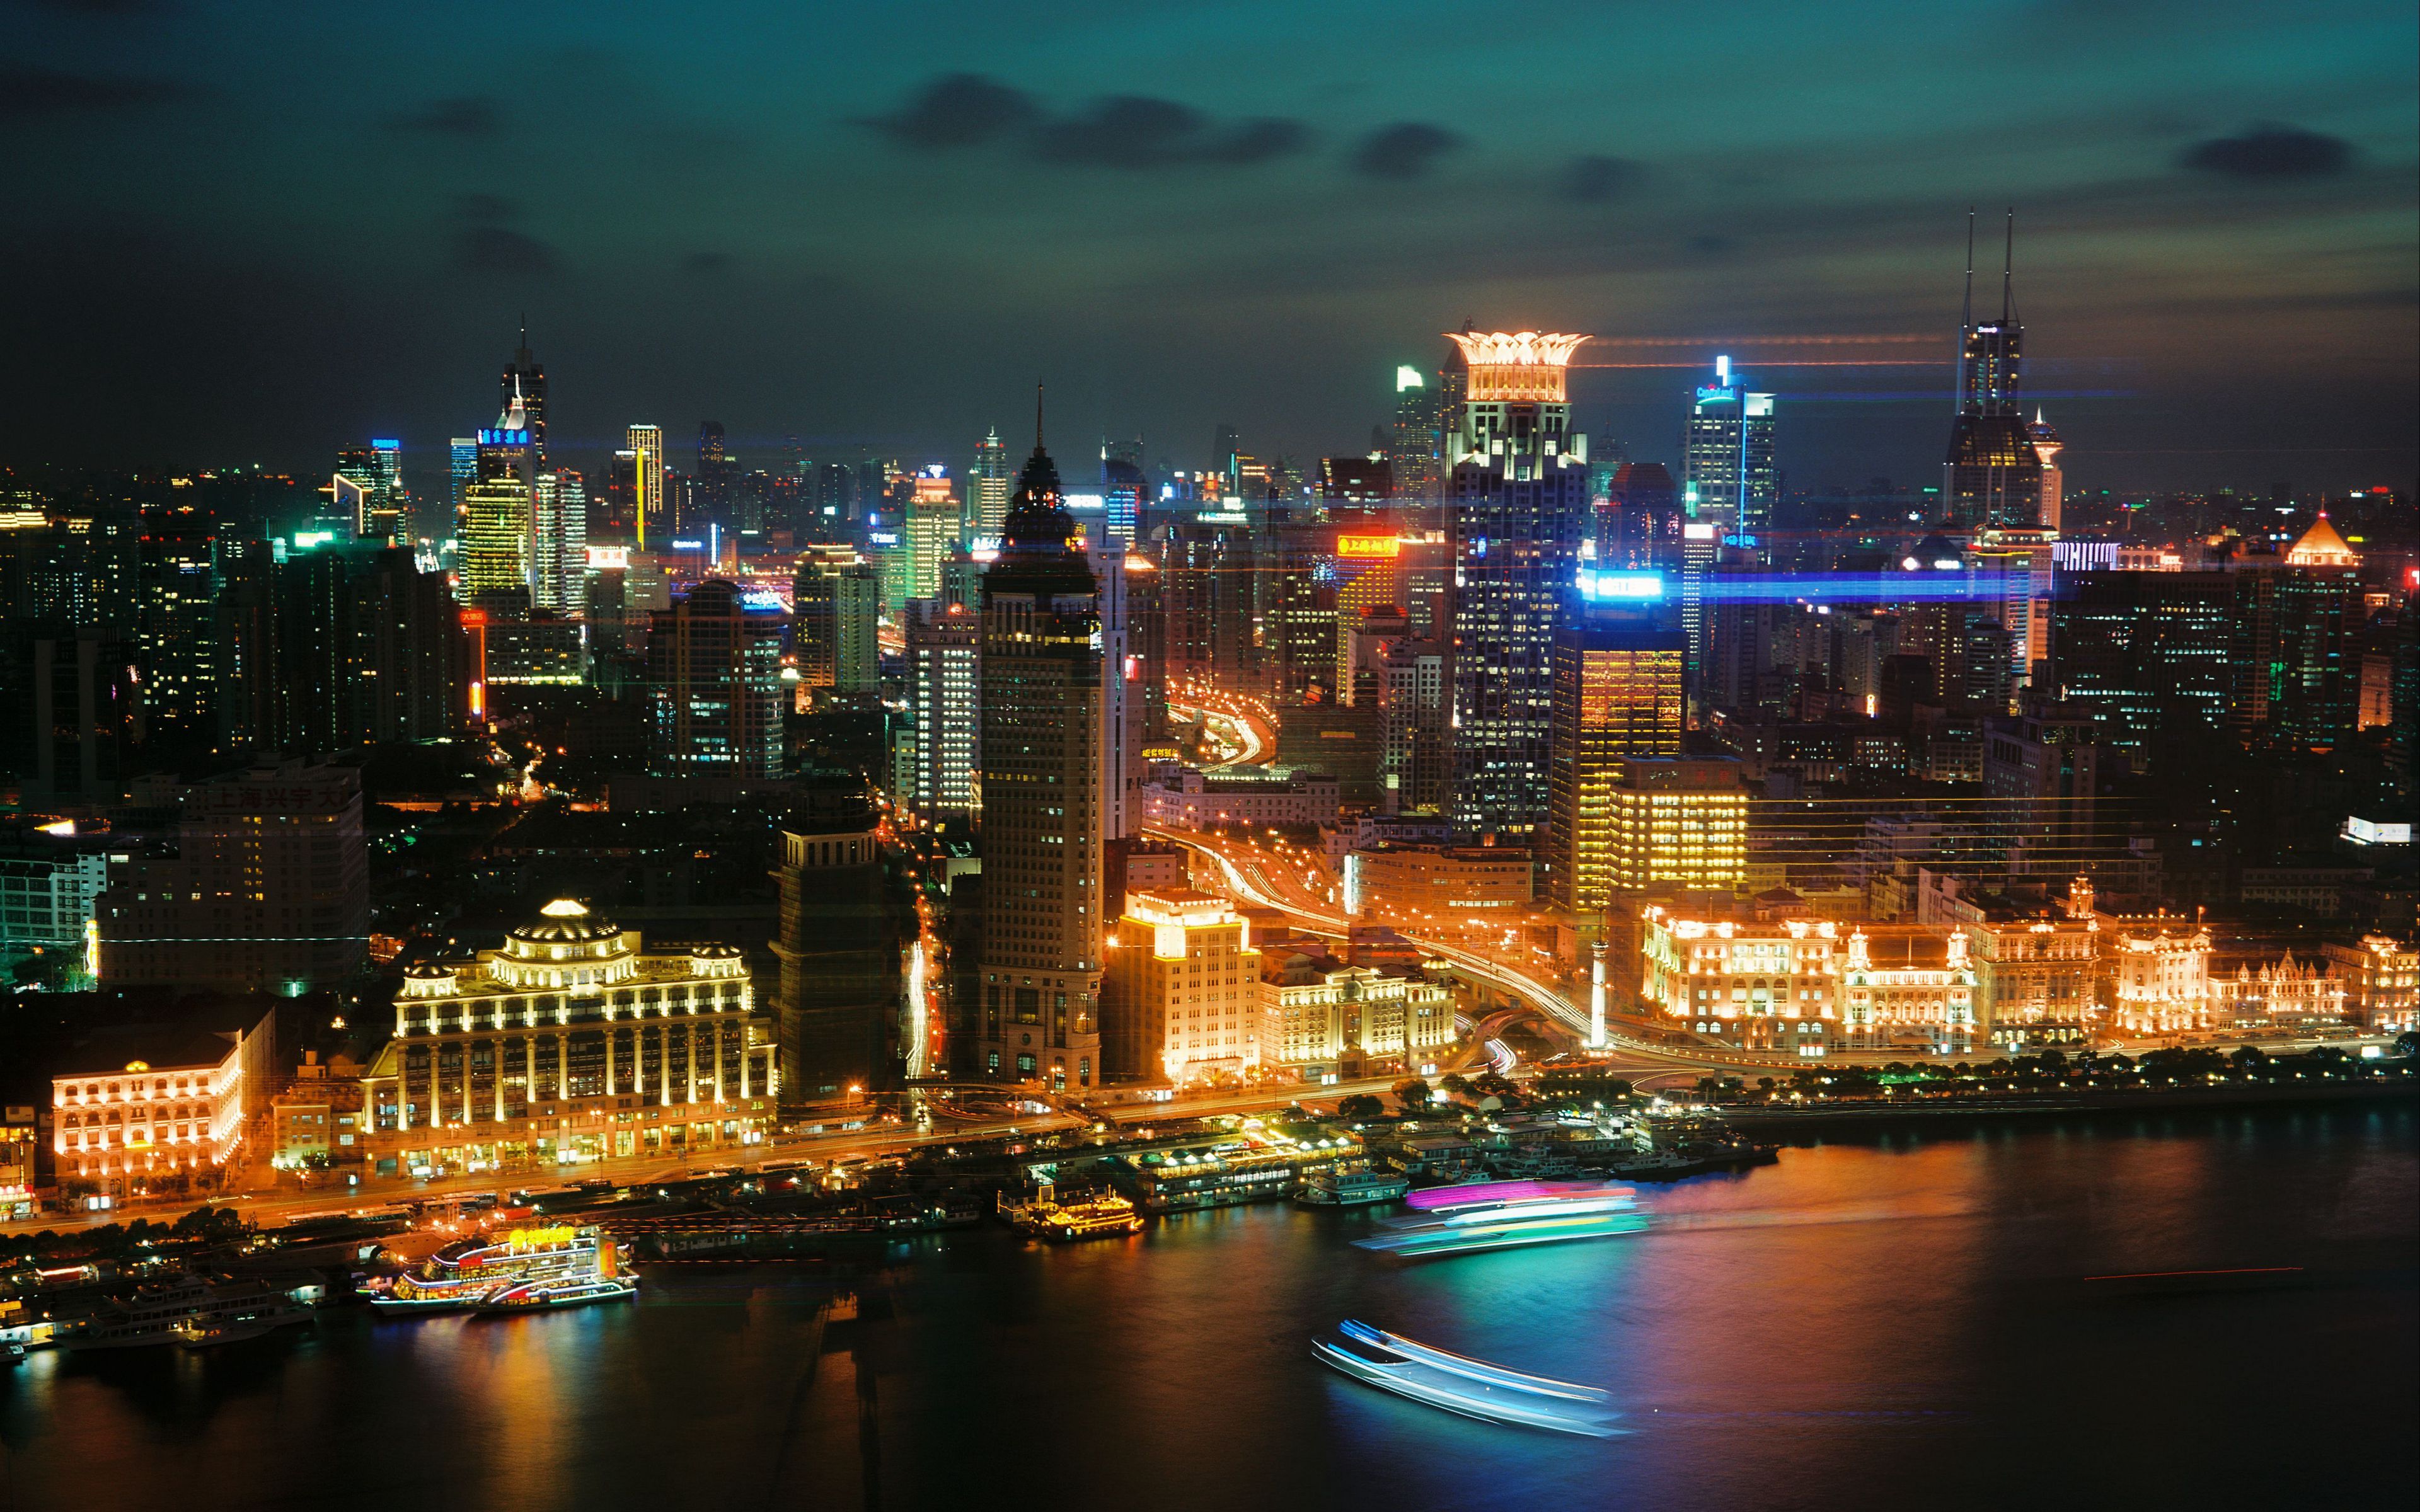 Download wallpaper 3840x2400 shanghai, skyscrapers, night city, top view 4k ultra HD 16:10 HD background